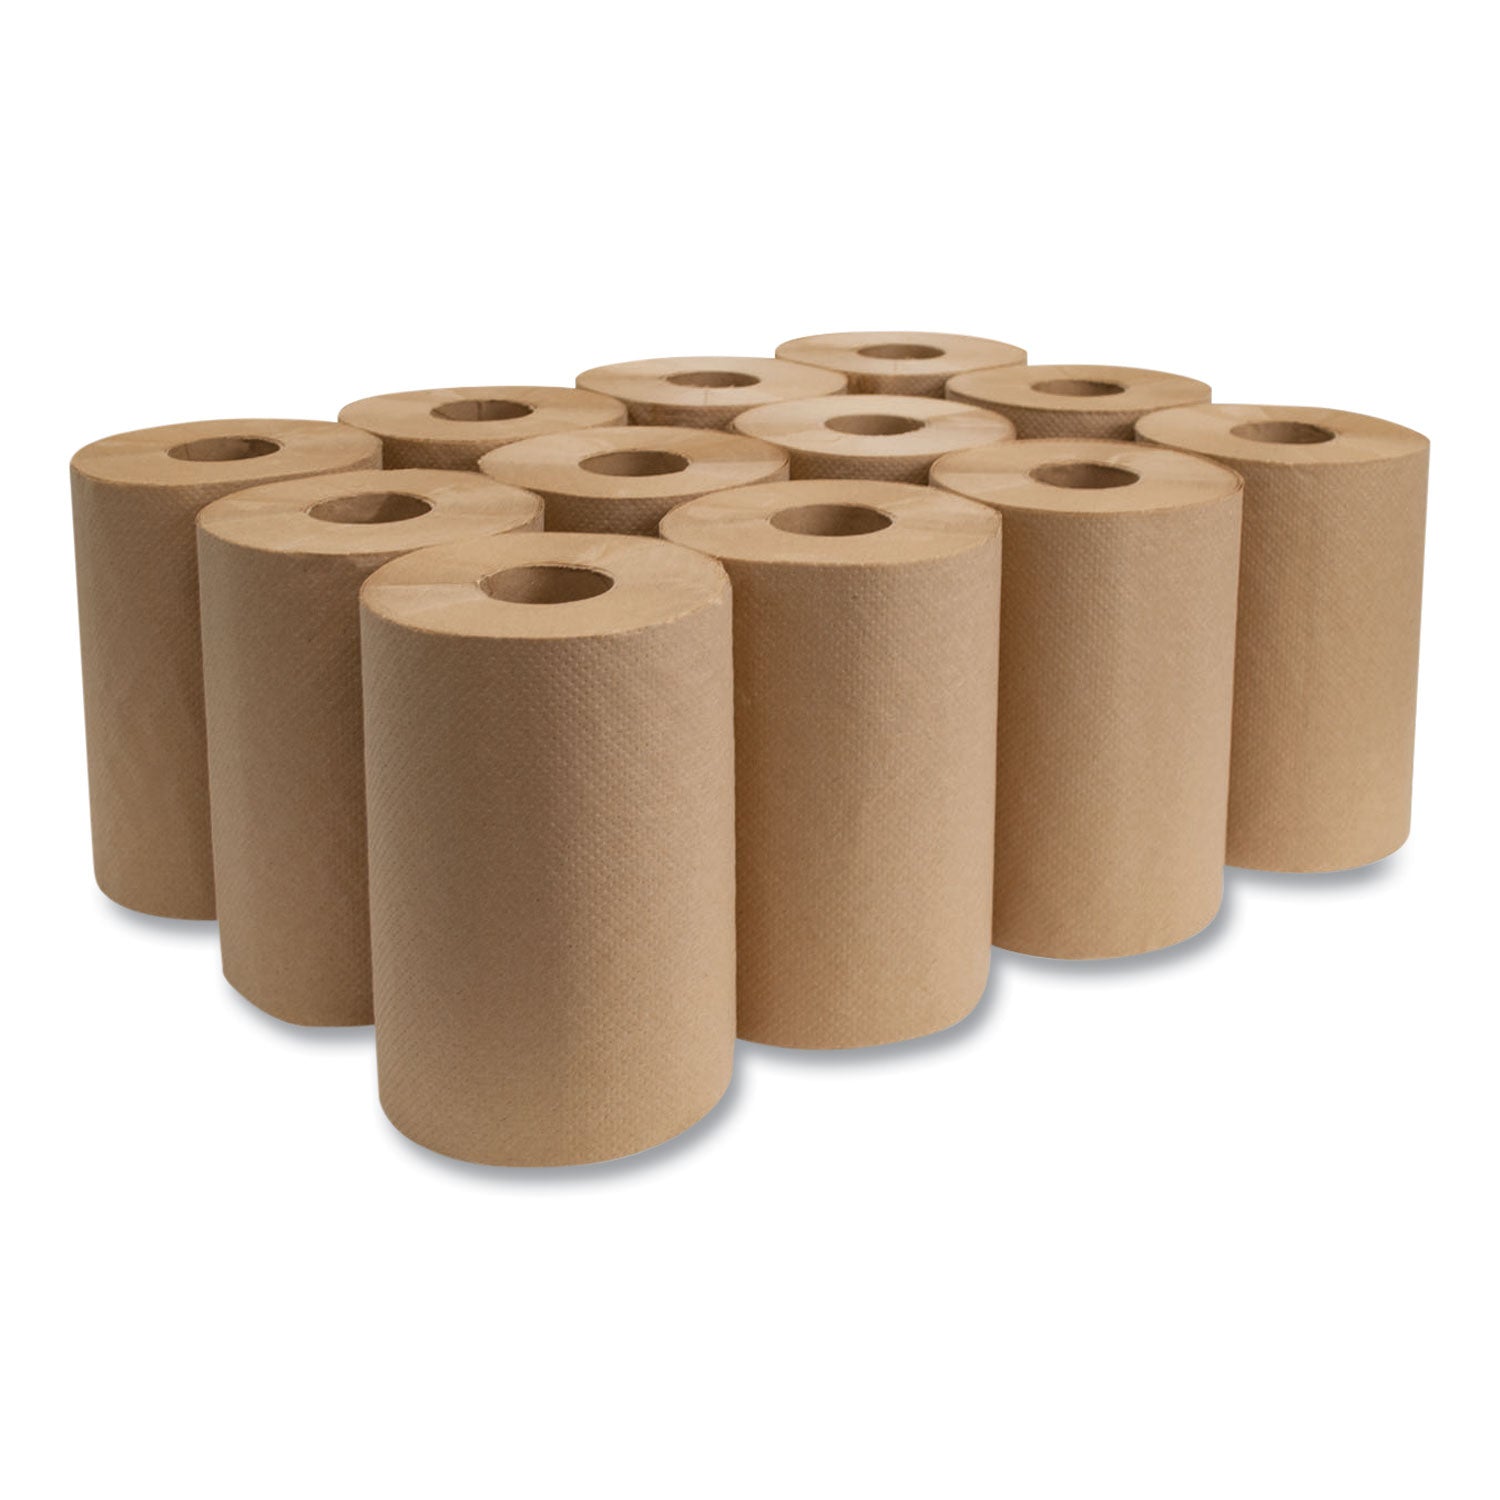 Morsoft Universal Roll Towels, 1-Ply, 8" x 350 ft, Brown, 12 Rolls/Carton - 